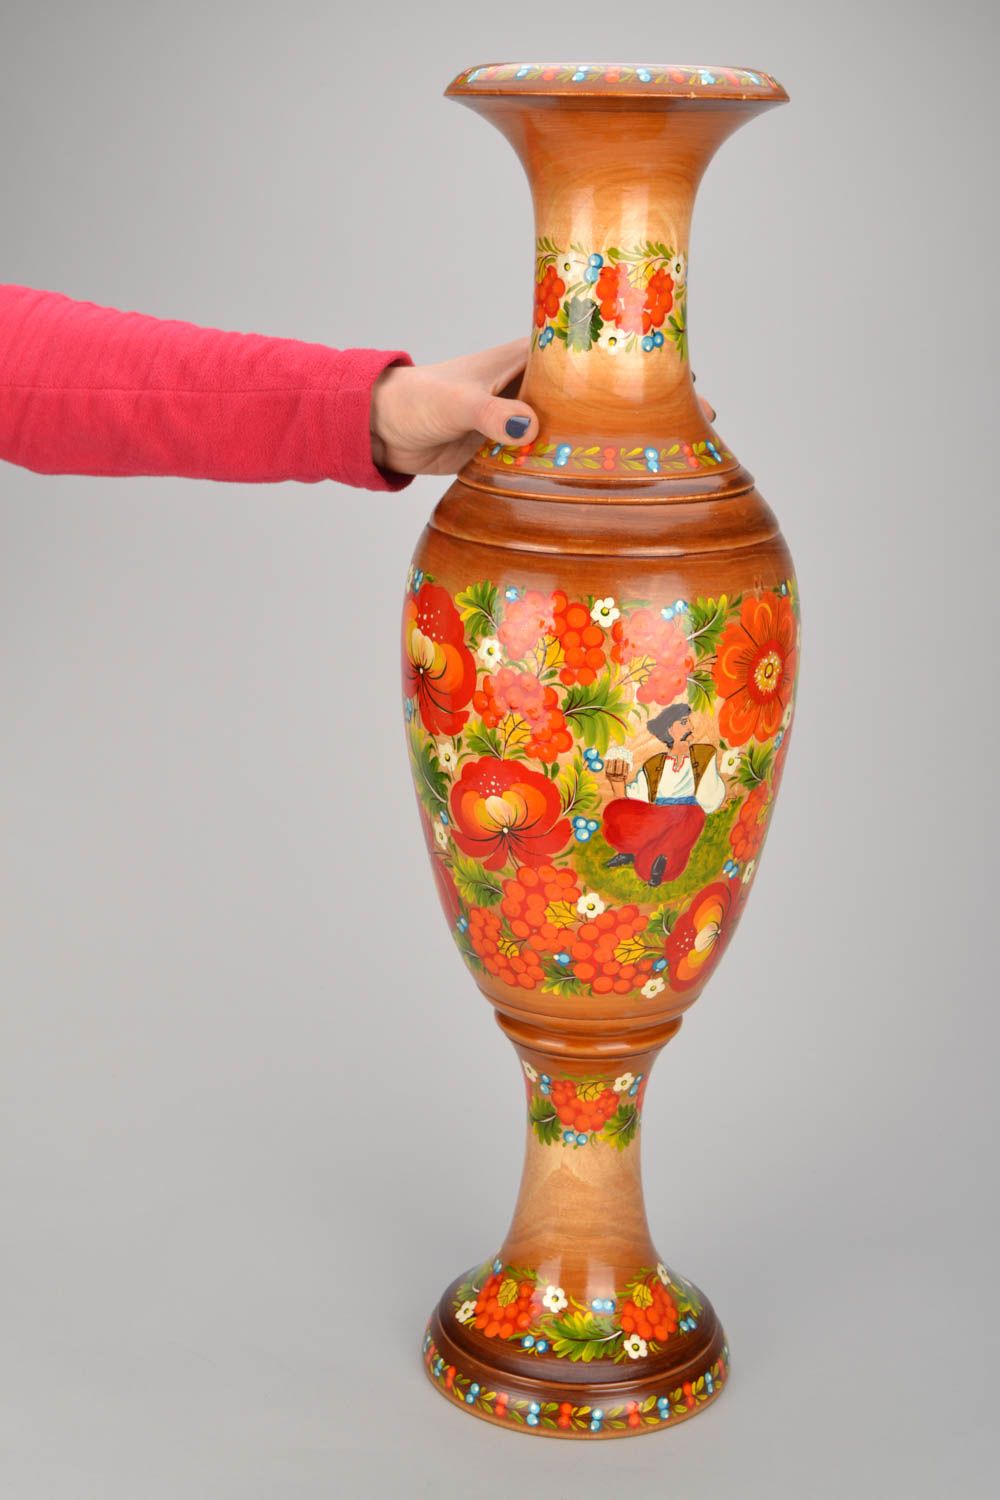 26 inches wooden handmade floor vase in floral design with red flowers 3,5 lb photo 2